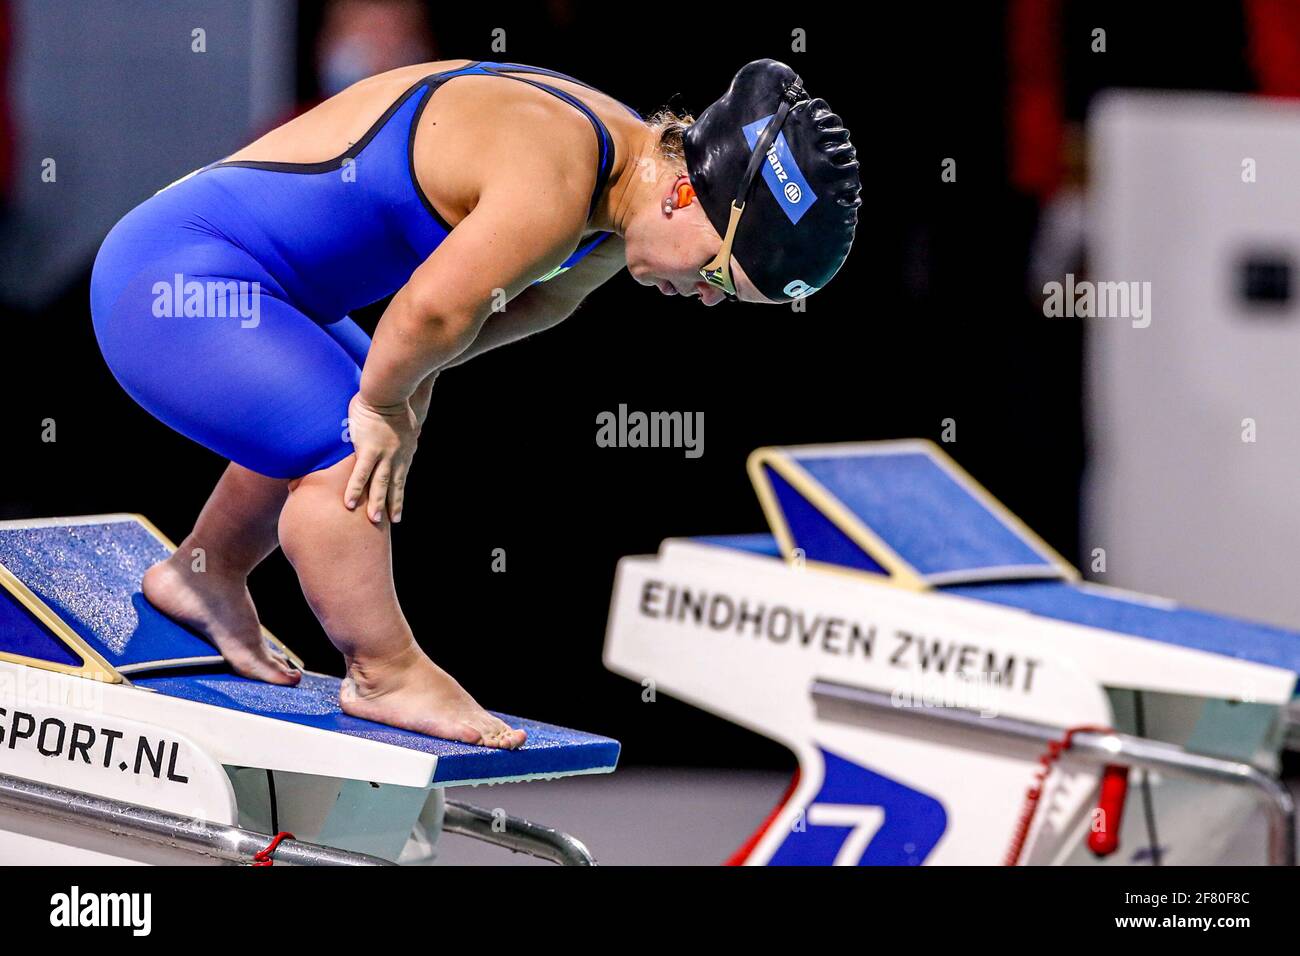 EINDHOVEN, NETHERLANDS - APRIL 10: Peggy Sonntag competing in the Women 100m Breaststroke Finals Para during the Eindhoven Qualification Meet at Pieter van den Hoogenband zwemstadion on April 10, 2021 in Eindhoven, Netherlands (Photo by Marcel ter Bals/Orange Pictures) Stock Photo